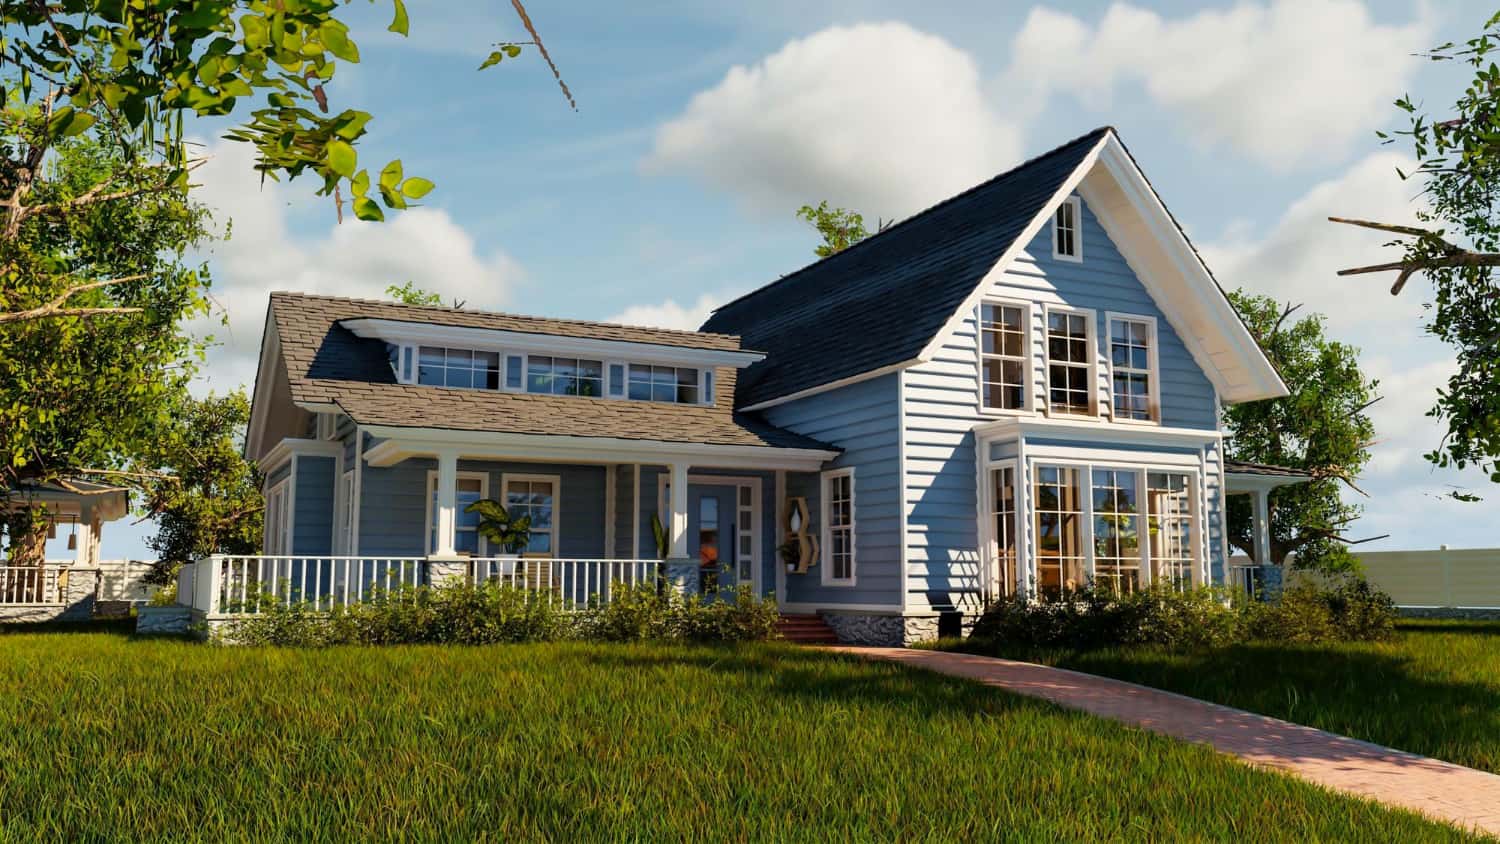 A modest two-story home with a shingle roof, light blue siting, and white window trim. The house has a front porch and pay windows and stands tall against a light blue sky with white clouds, and a green lawn.